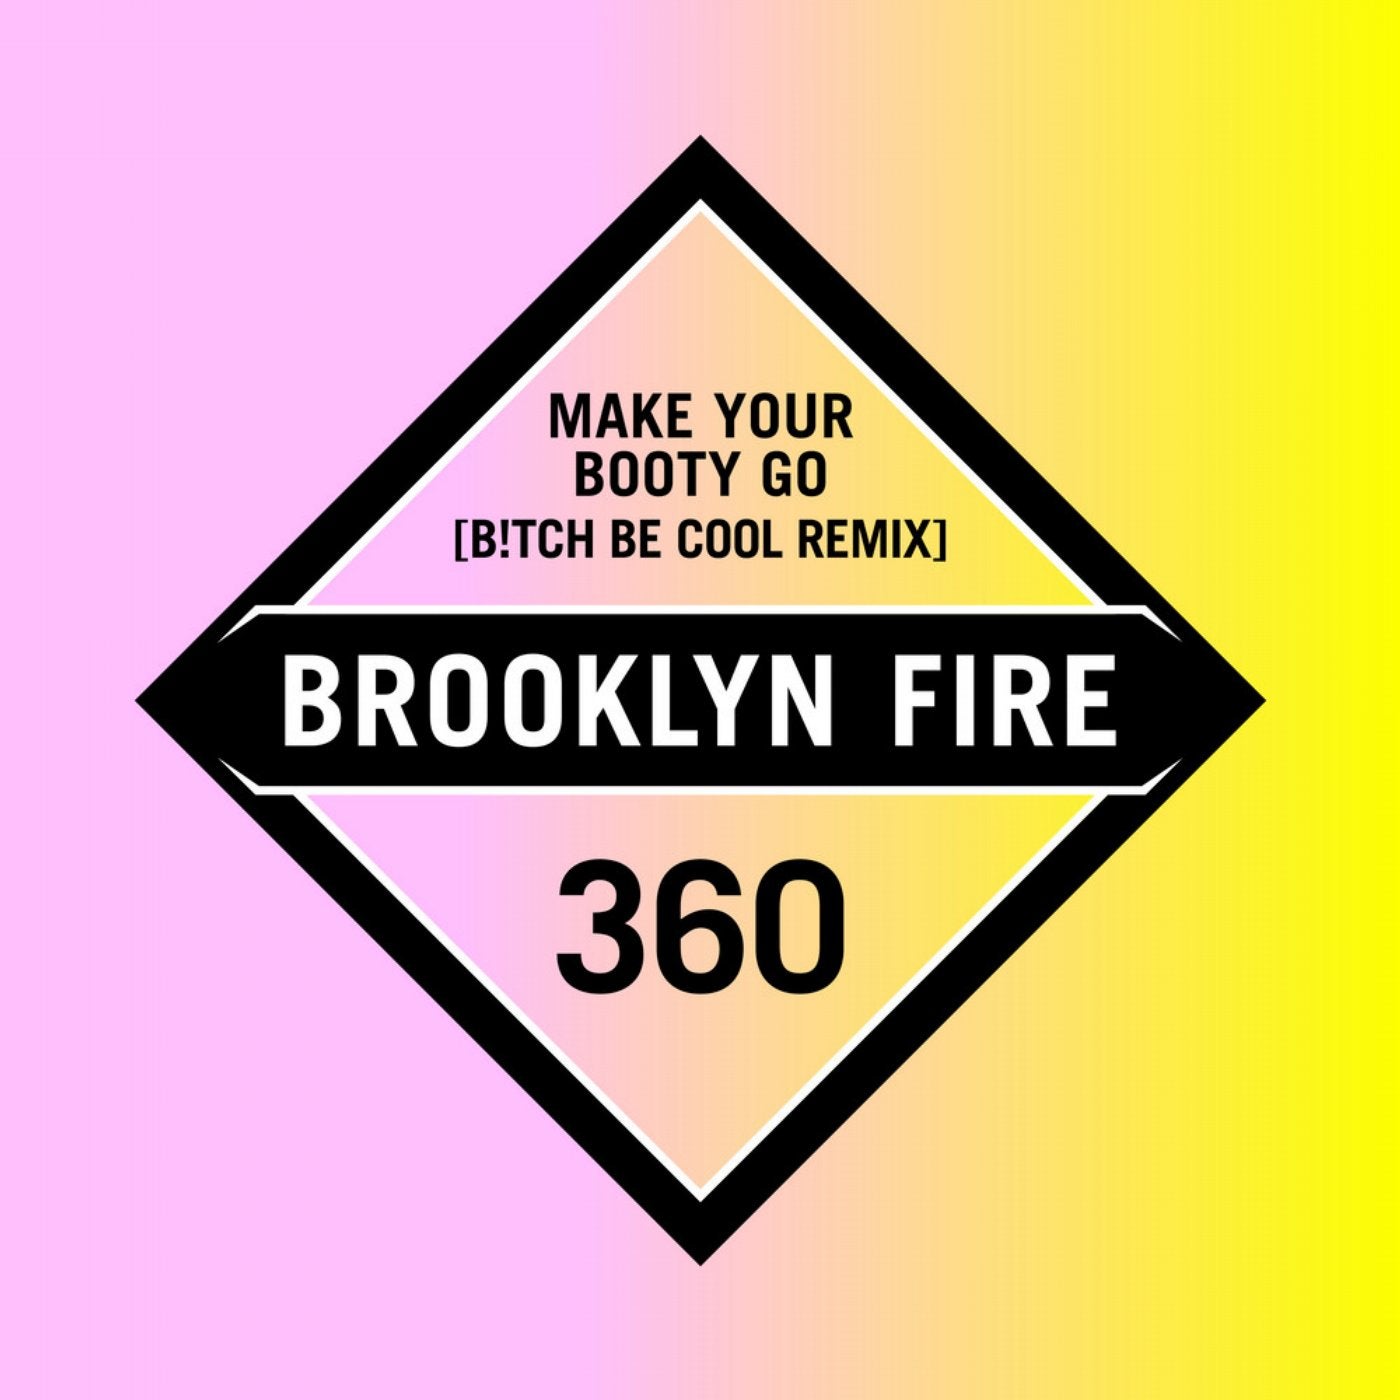 Make Your Booty Go (B!tch Be Cool Remix)